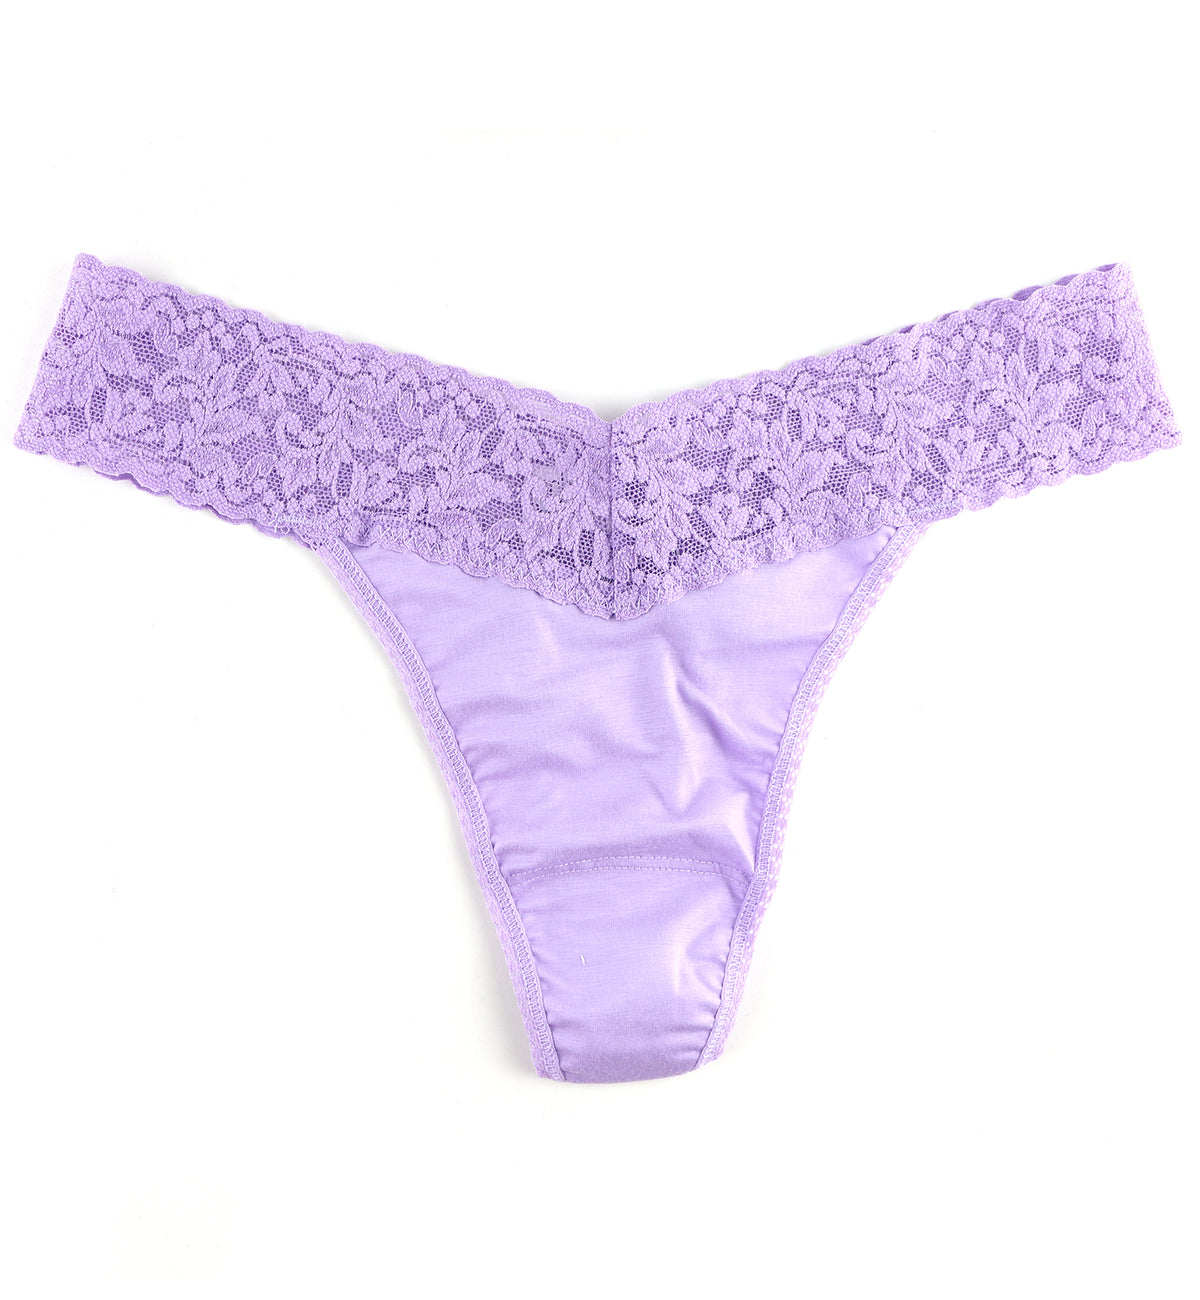 Hanky Panky Original Rise Organic Cotton Thong with Lace (891801),French Lavender - French Lavender,One Size